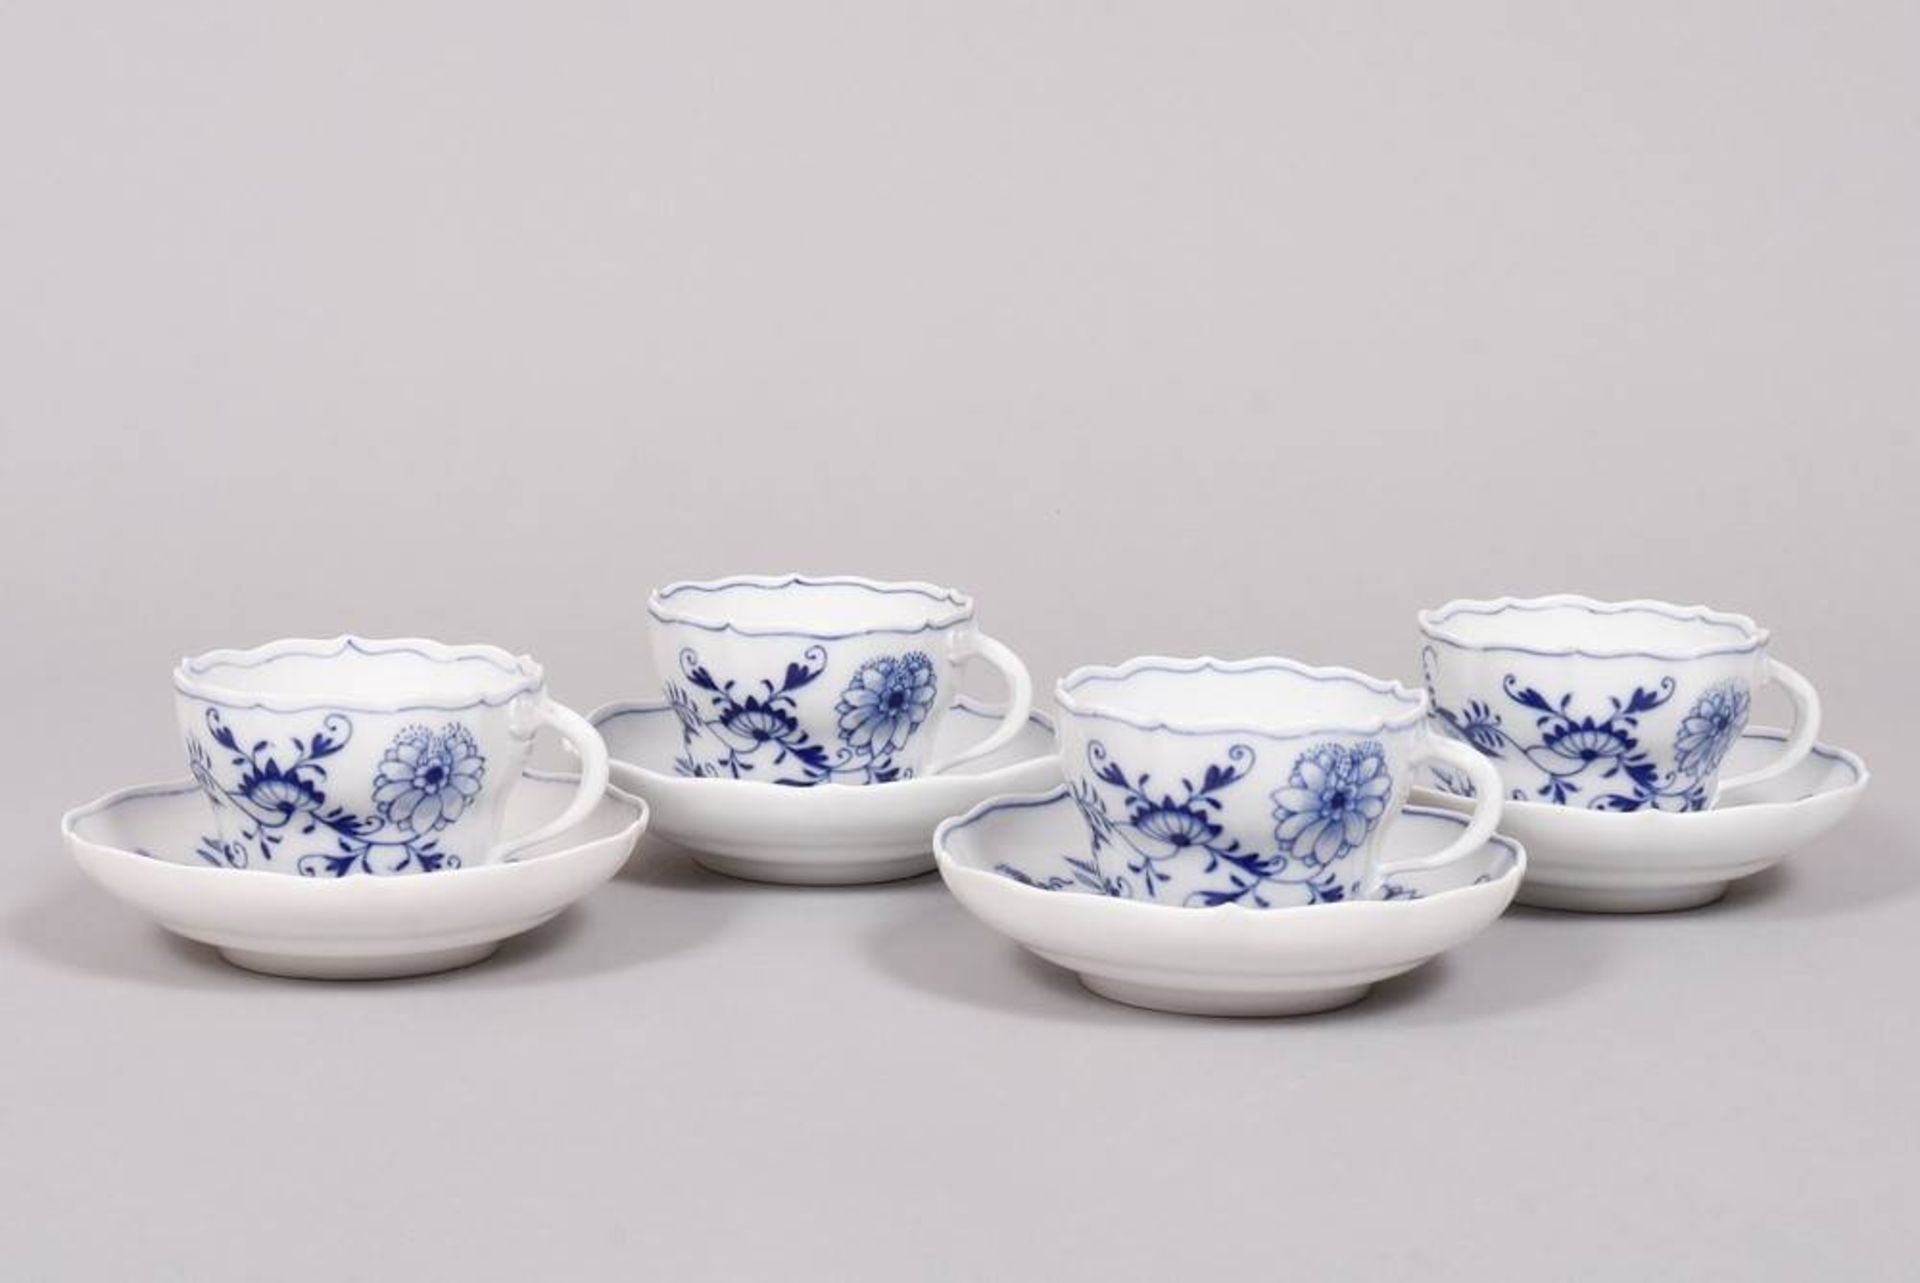 4 cups and saucers, Meissen, c. 1900